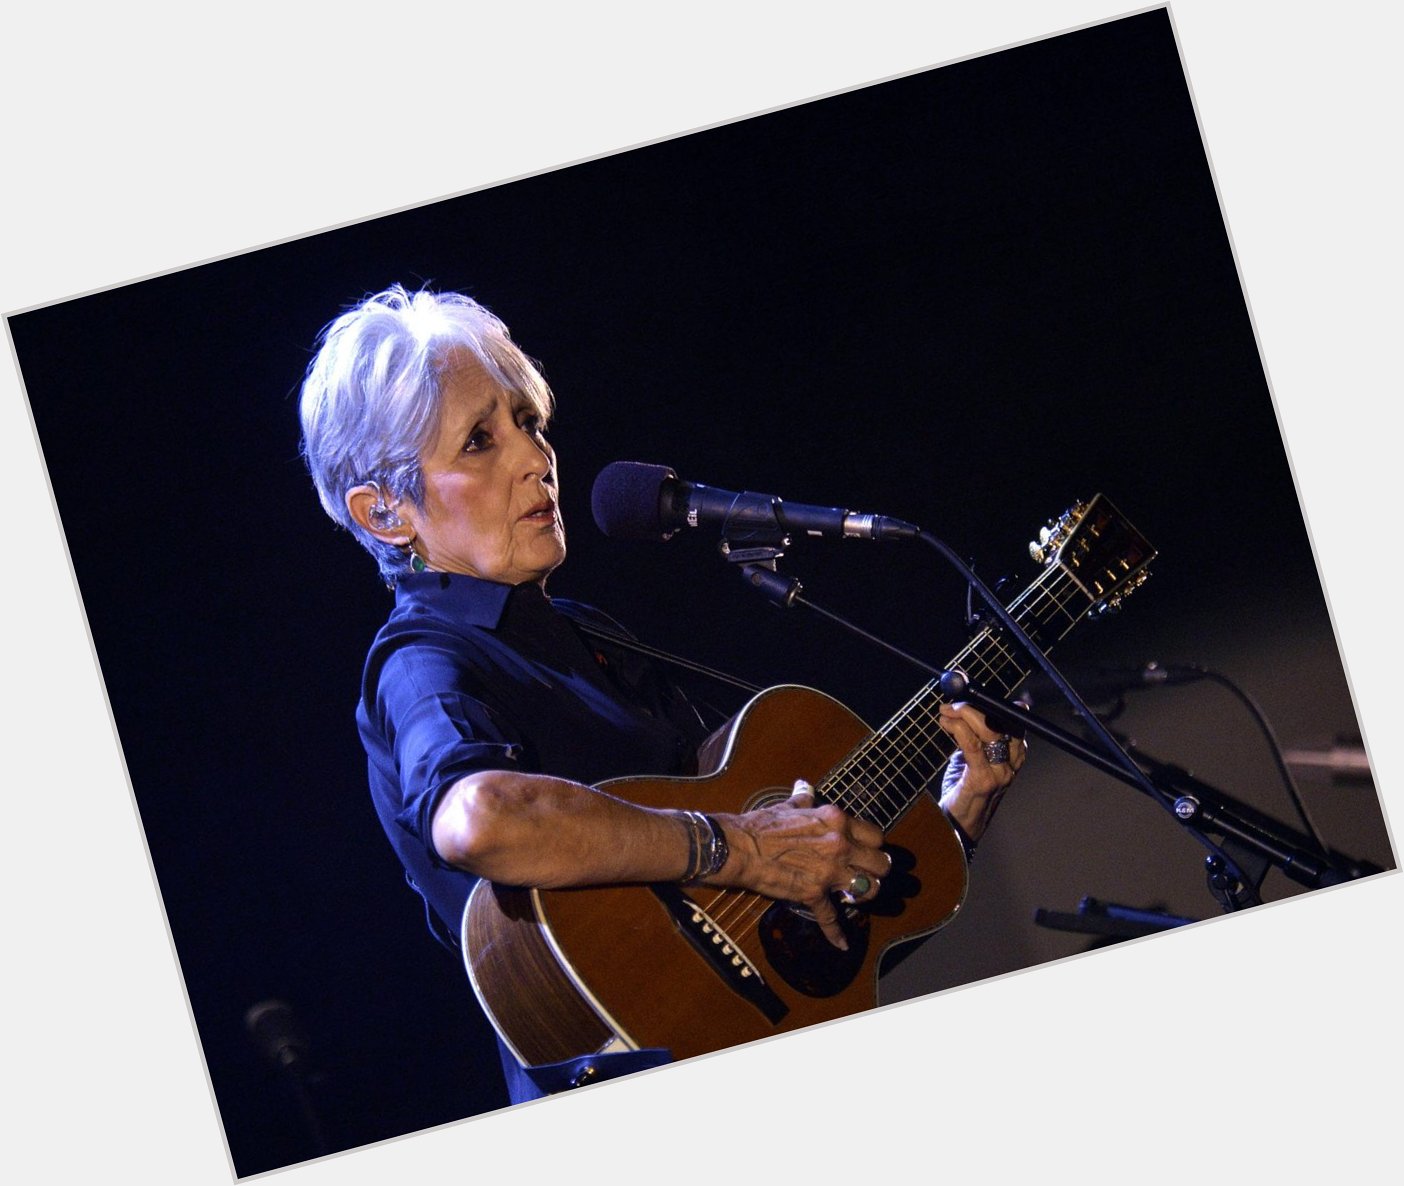 Please join me here at in wishing the one and only Joan Baez a very Happy Birthday today  